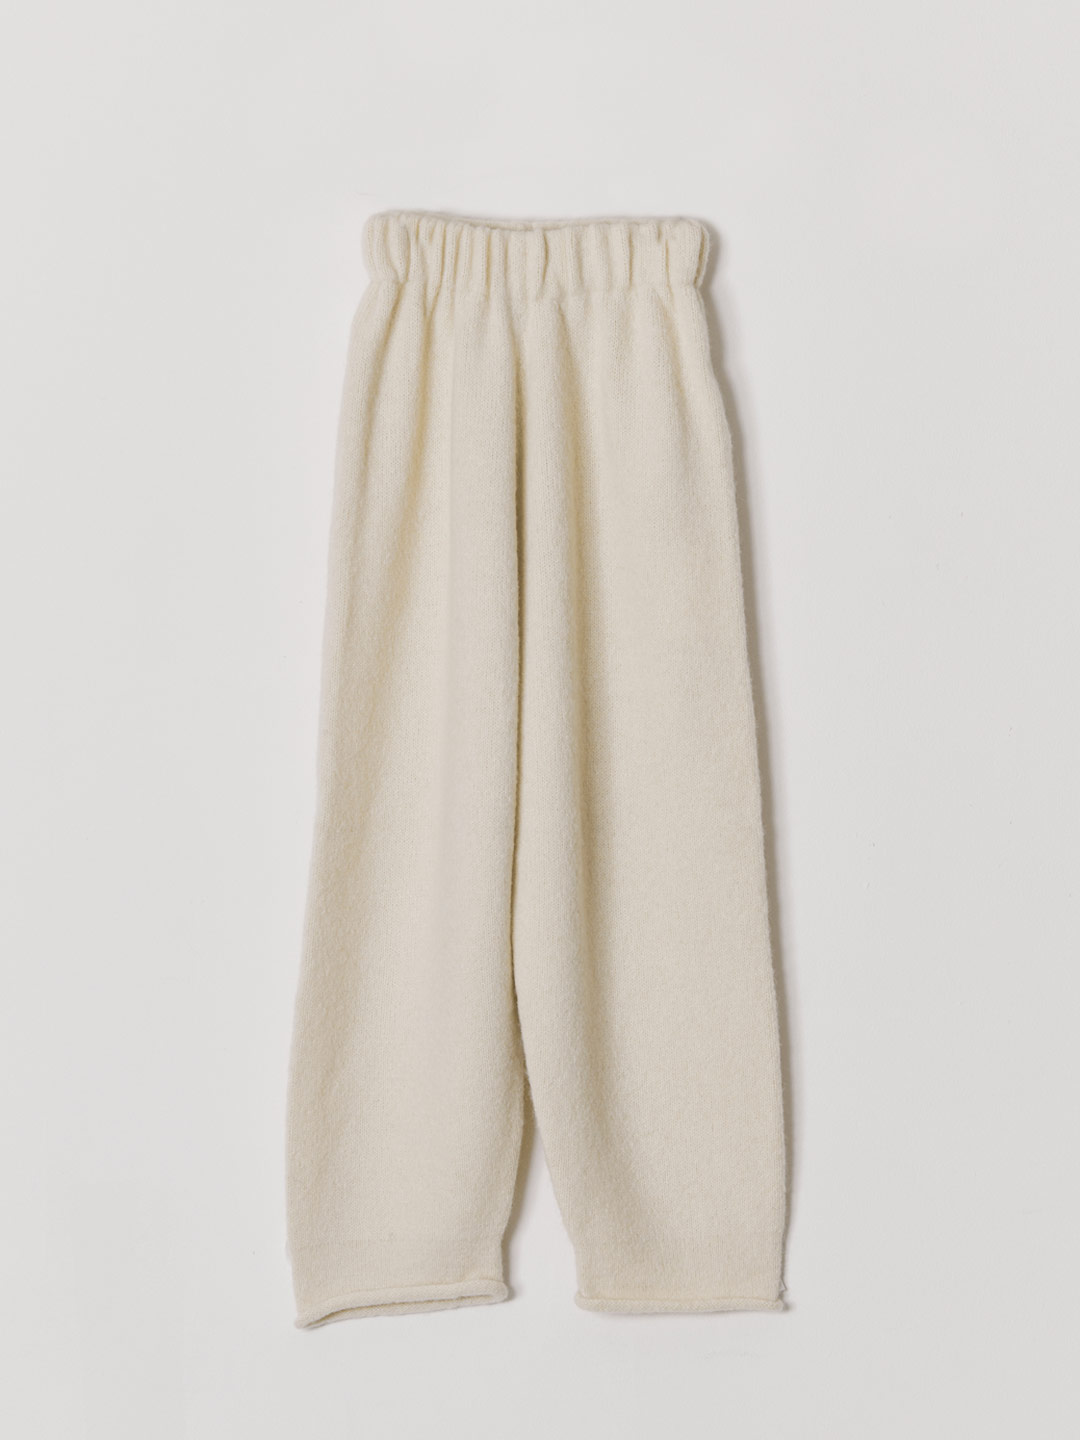 New Roll Pants - White